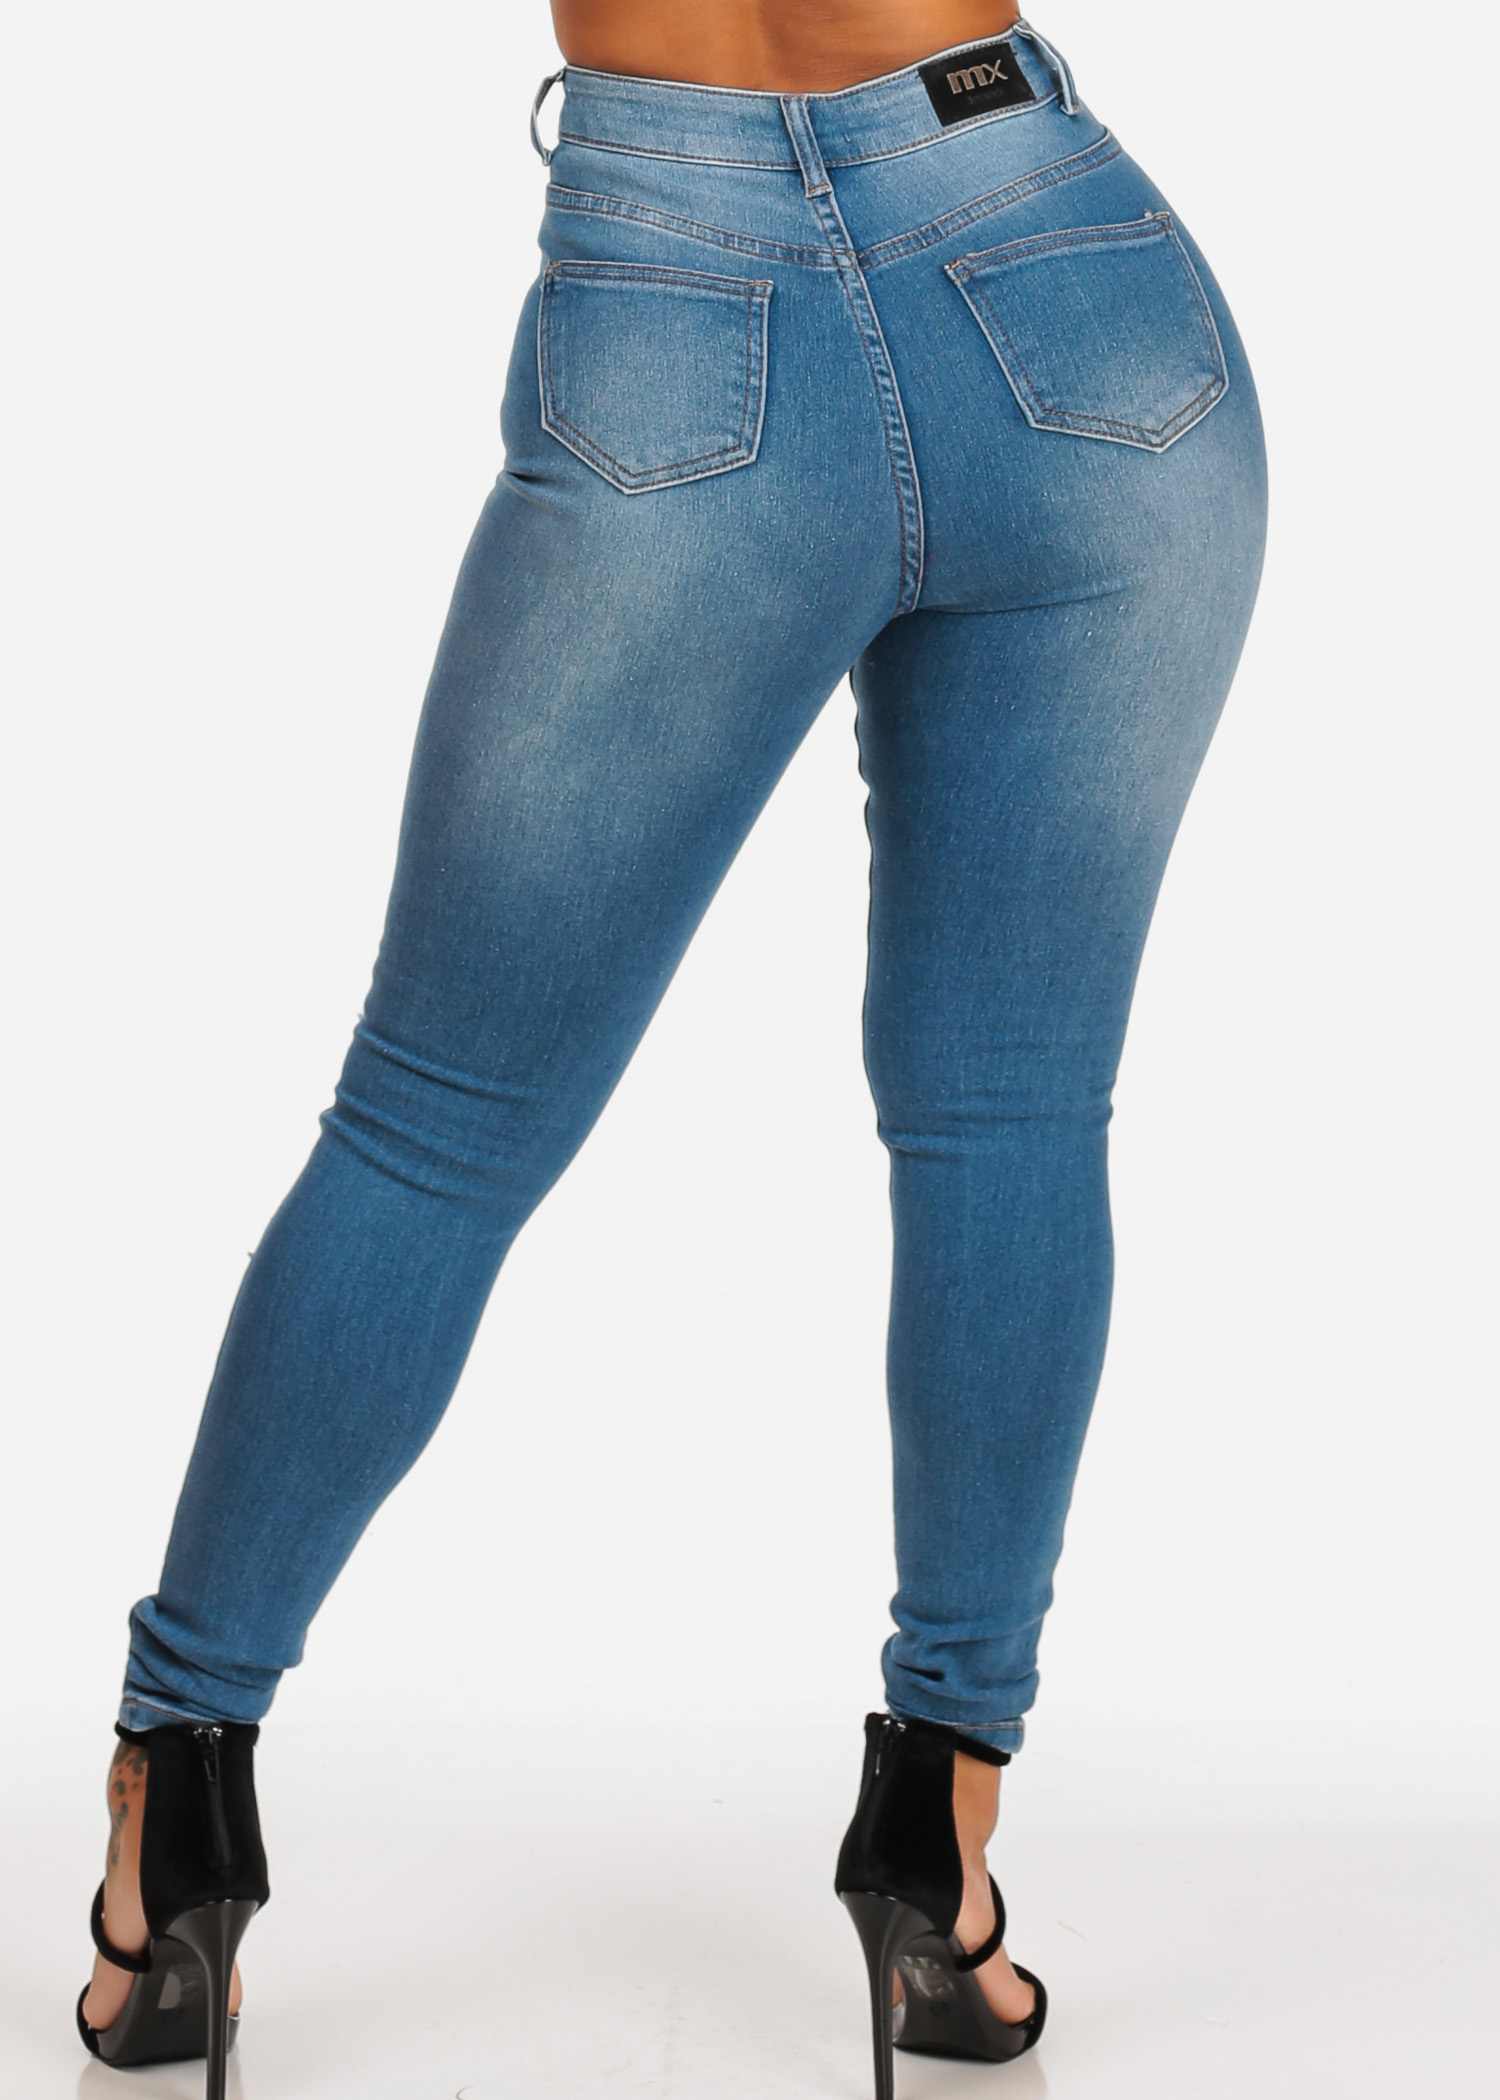 Womens Juniors Women's Junior Ladies Casual Sexy Ultra High Waisted Light Wash Distressed Ripped 1 Button Stretchy Skinny Jeans 10583W - image 3 of 4